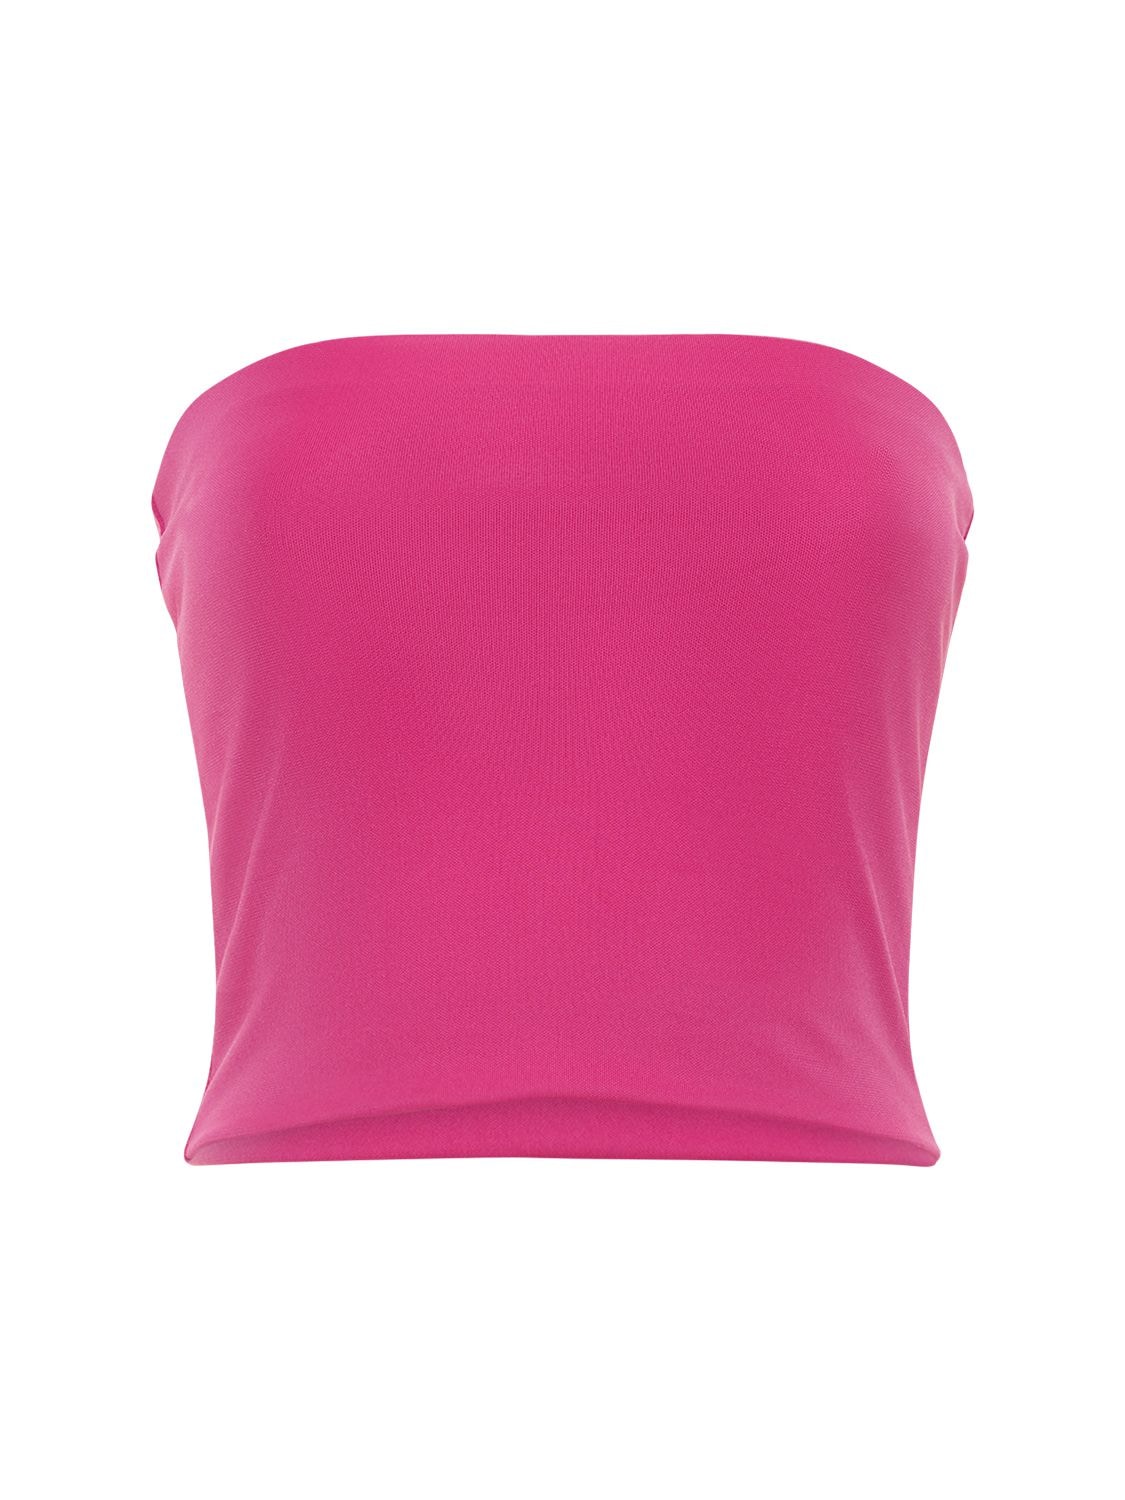 Image of Gwen Jersey Stretch Tube Top